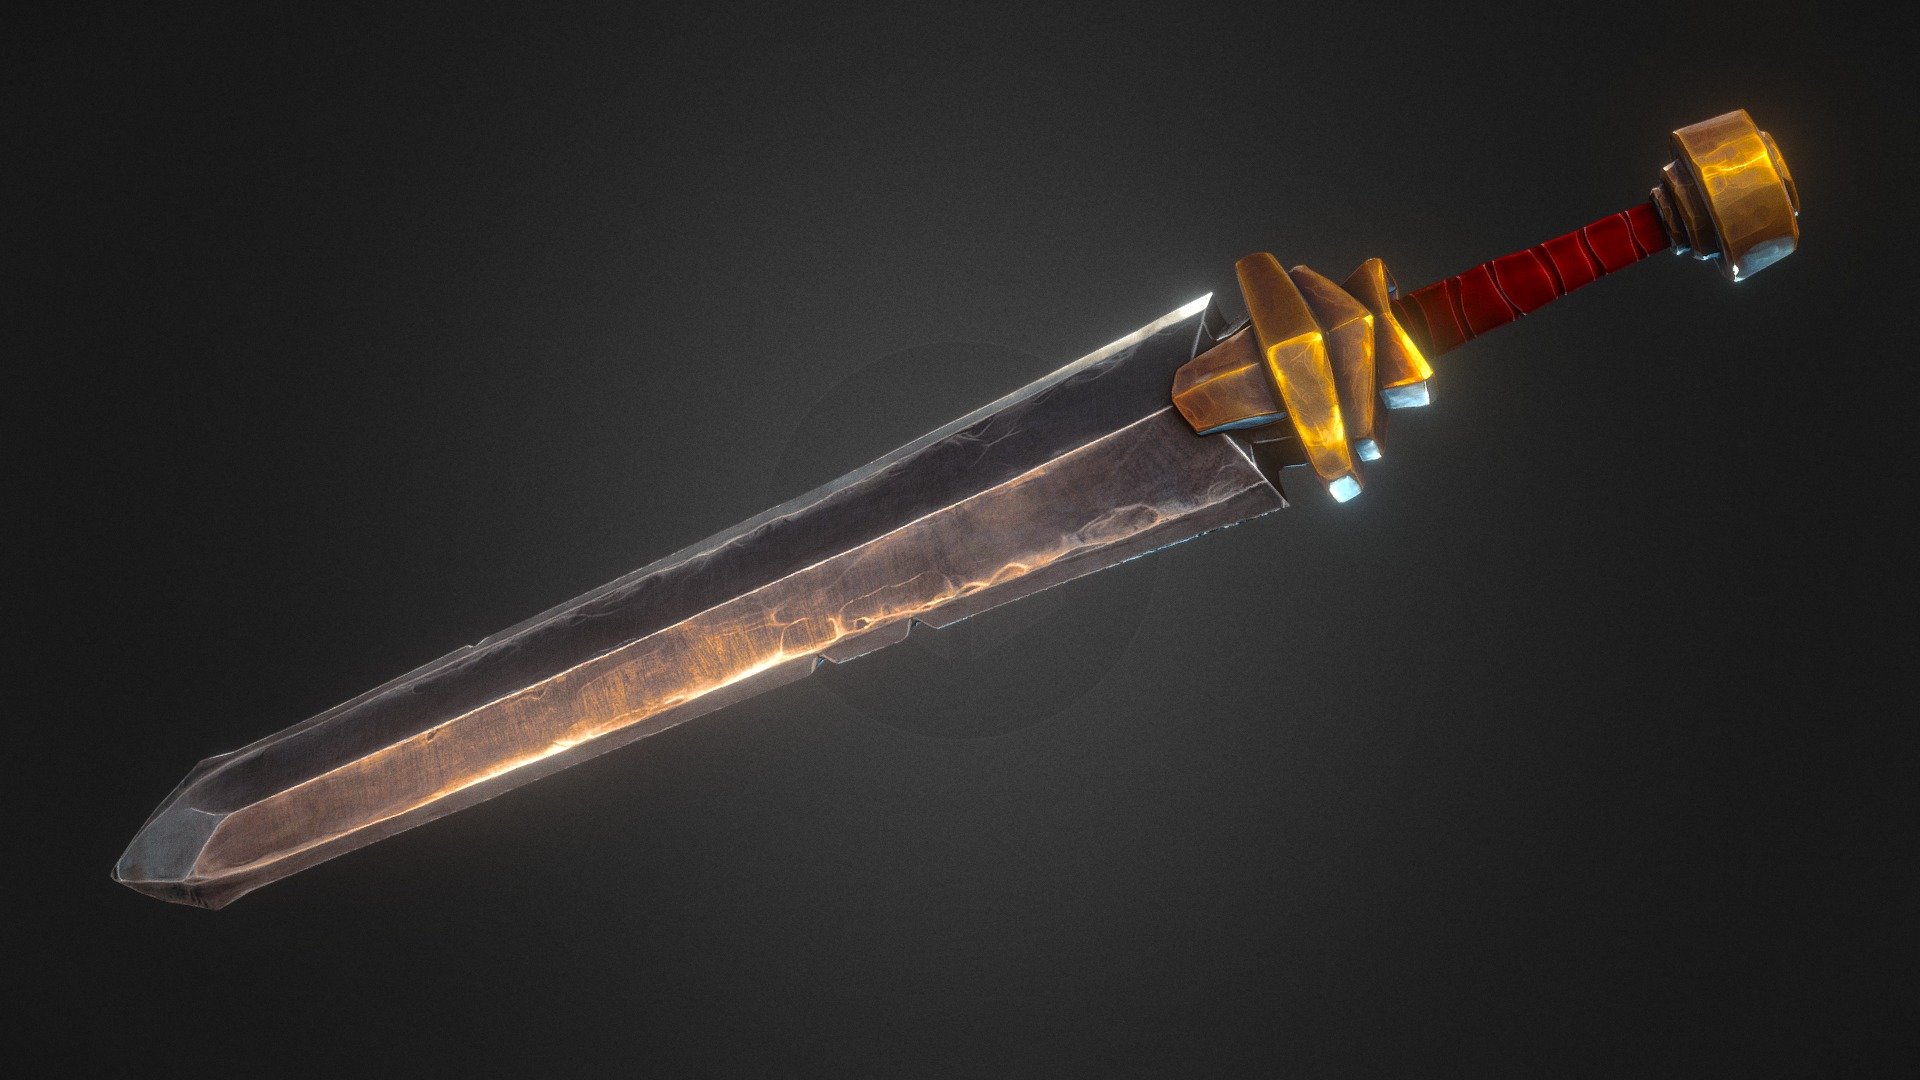 A stylized sword that I was commissioned to make this year. This was the sturdy version of the light boardsword.

View on Artstation:
https://www.artstation.com/artwork/18Rz4K

Commission concept:
https://www.artstation.com/artwork/RY1Aay - Heavy Broadsword - 3D model by RachelC (@rachelclarkediting) 3d model